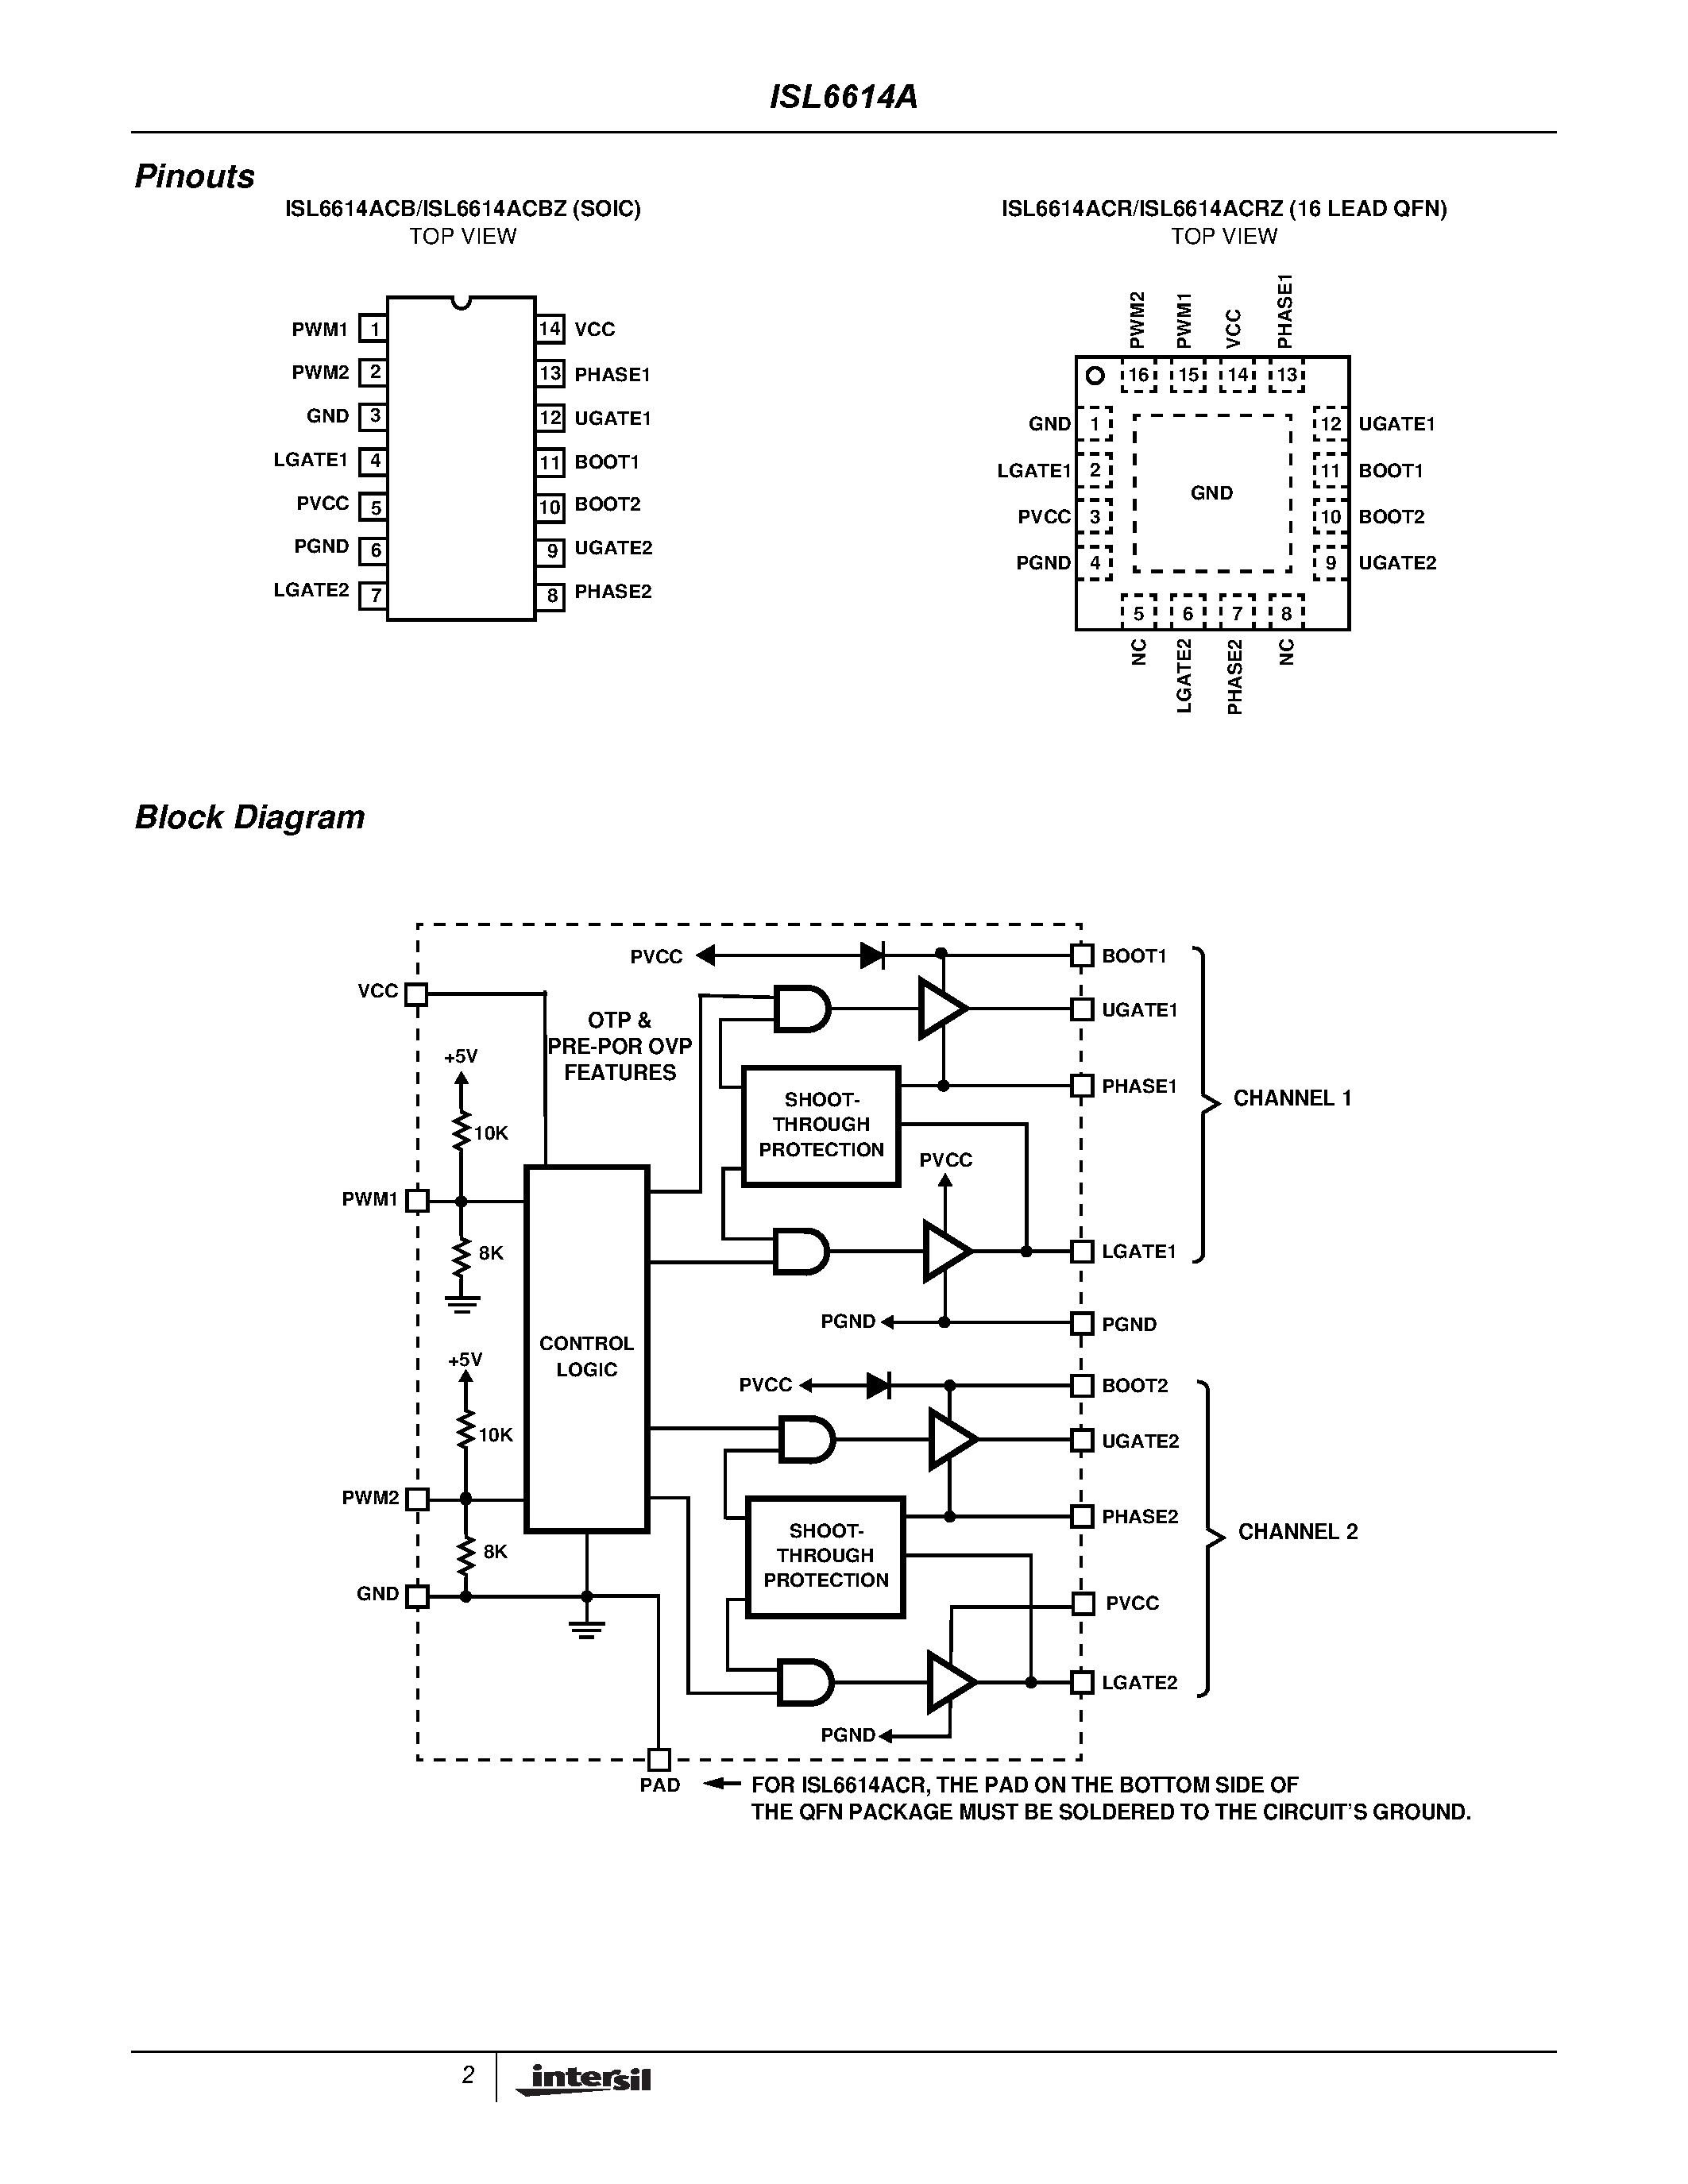 Datasheet ISL6614ACB-T - Dual Advanced Synchronous Rectified Buck MOSFET Drivers with Pre-POR OVP page 2